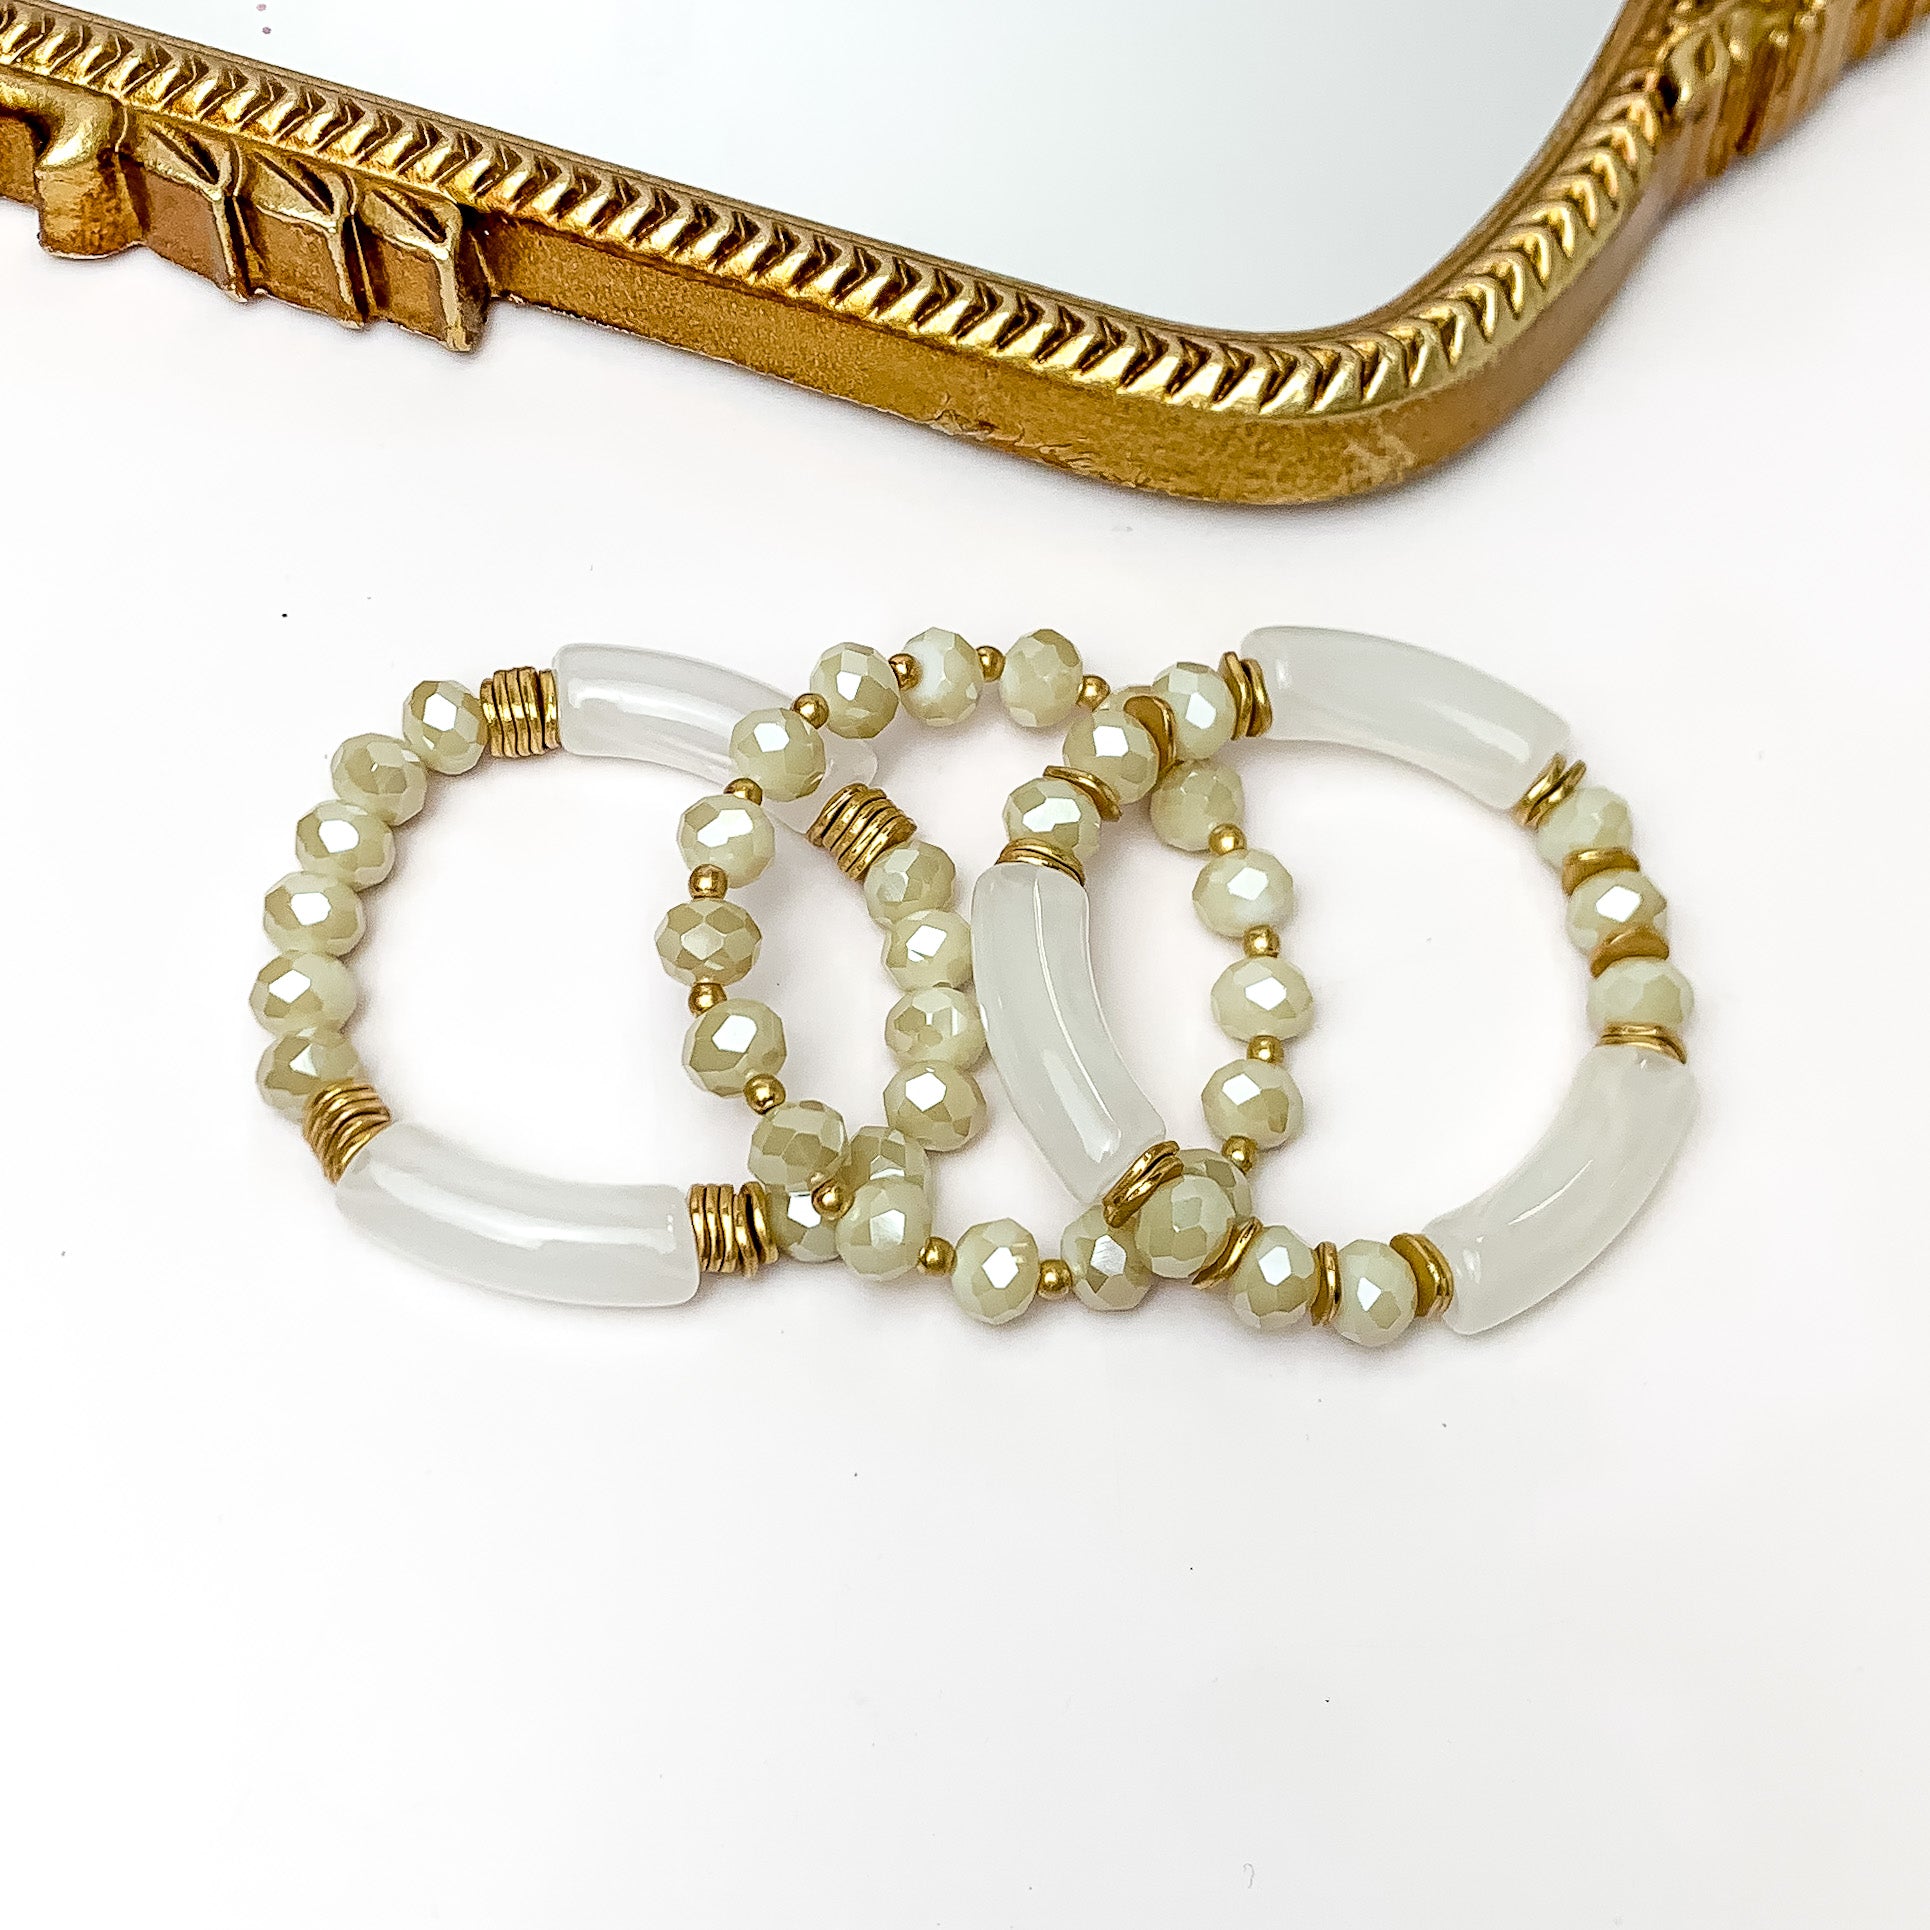 Set of Three | Sunny Bliss Crystal Beaded Bracelet Set in Ivory. Pictured on a white background with a gold trimmed mirror above the bracelets.